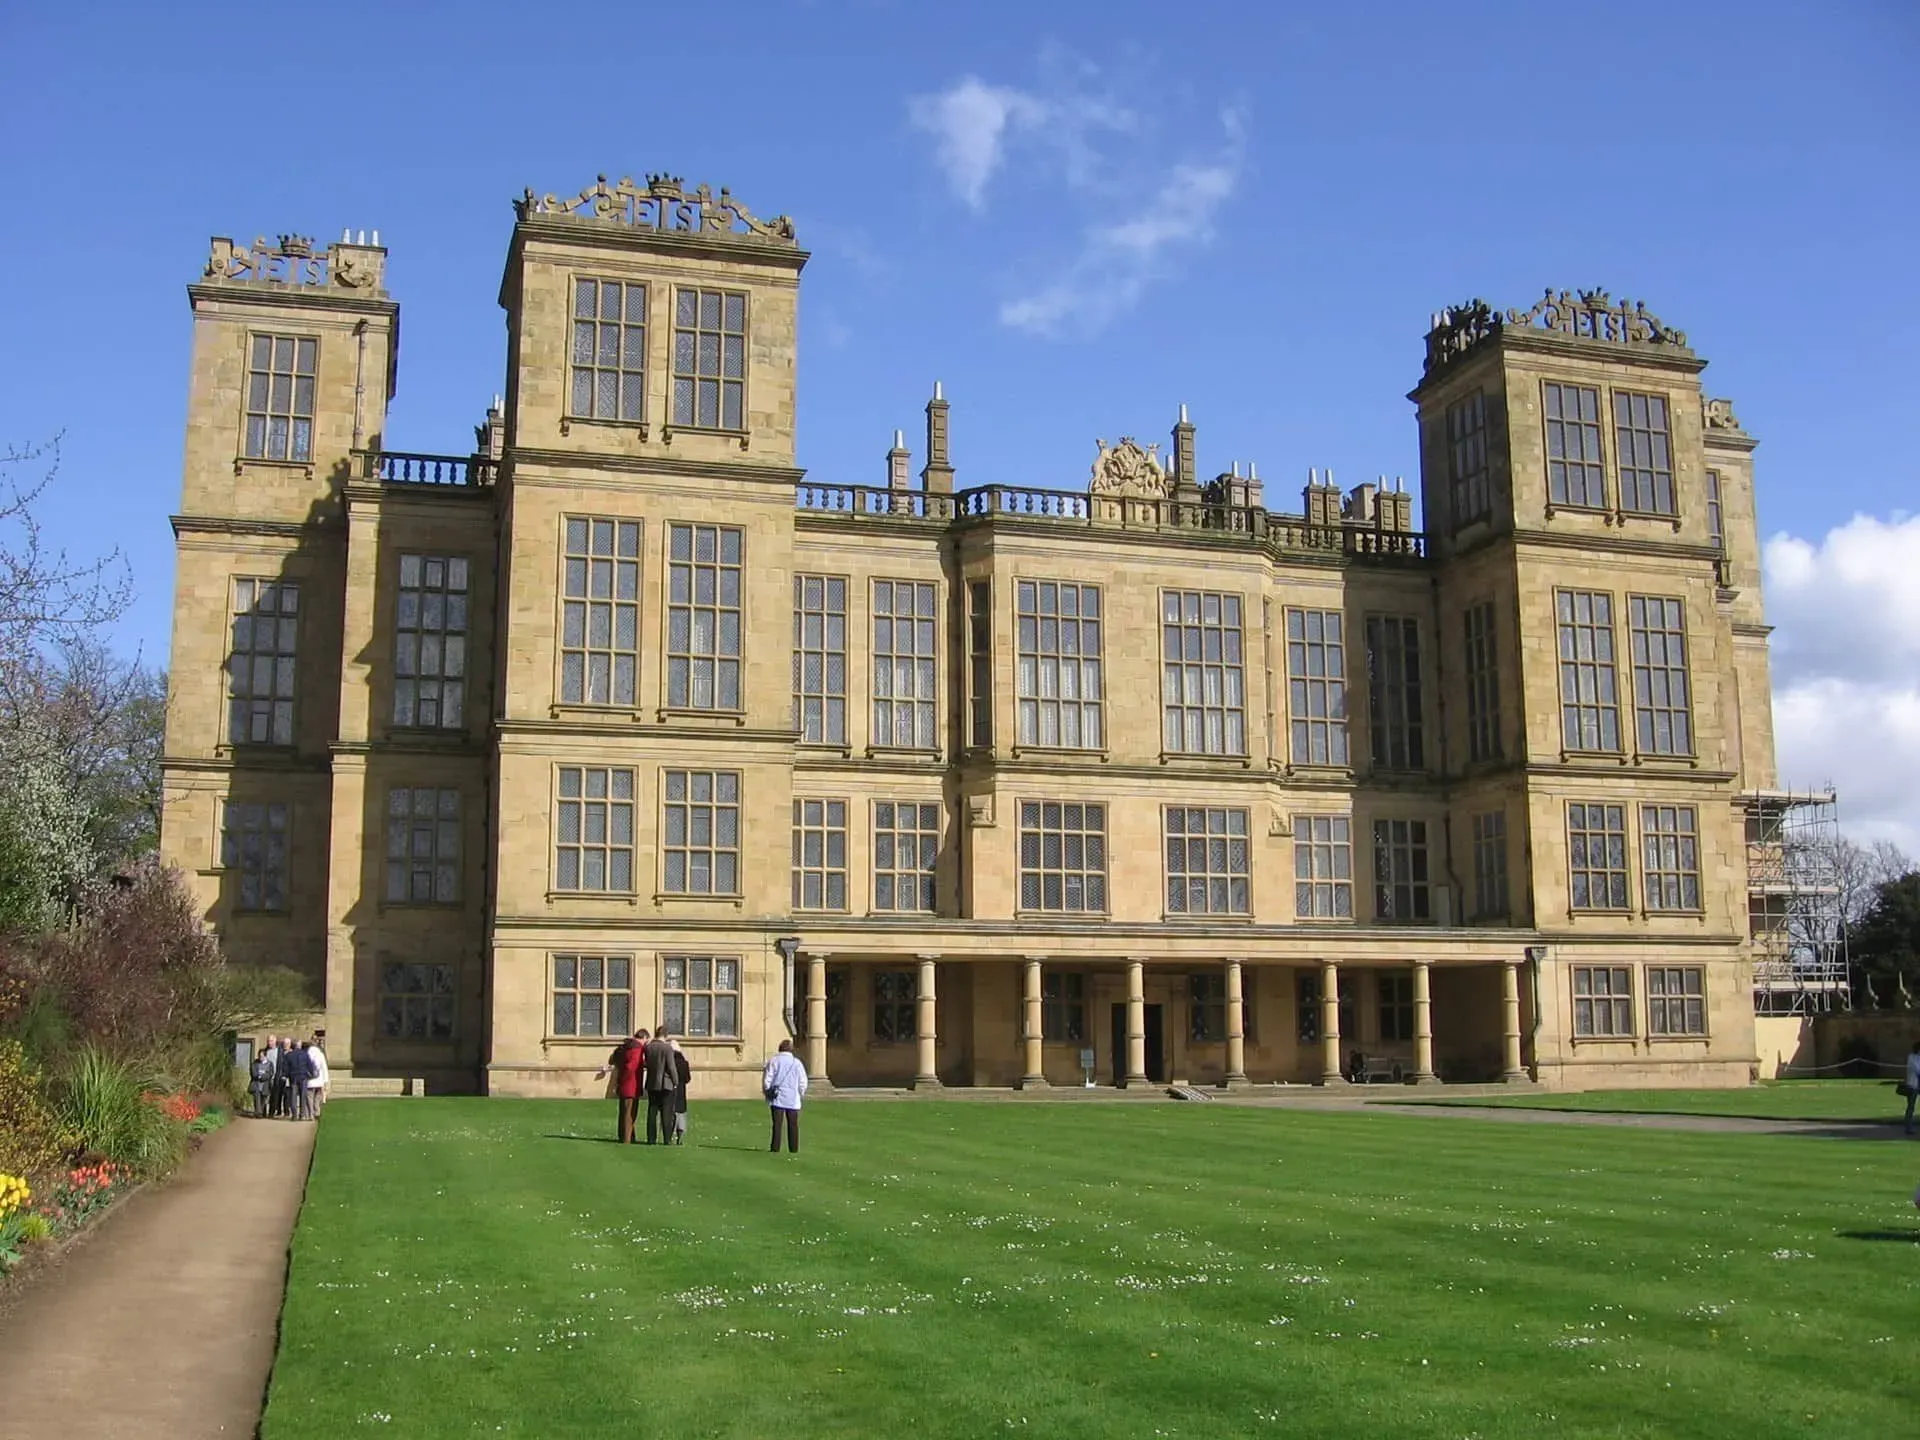 The exterior of Hardwick Hall on a sunny day.